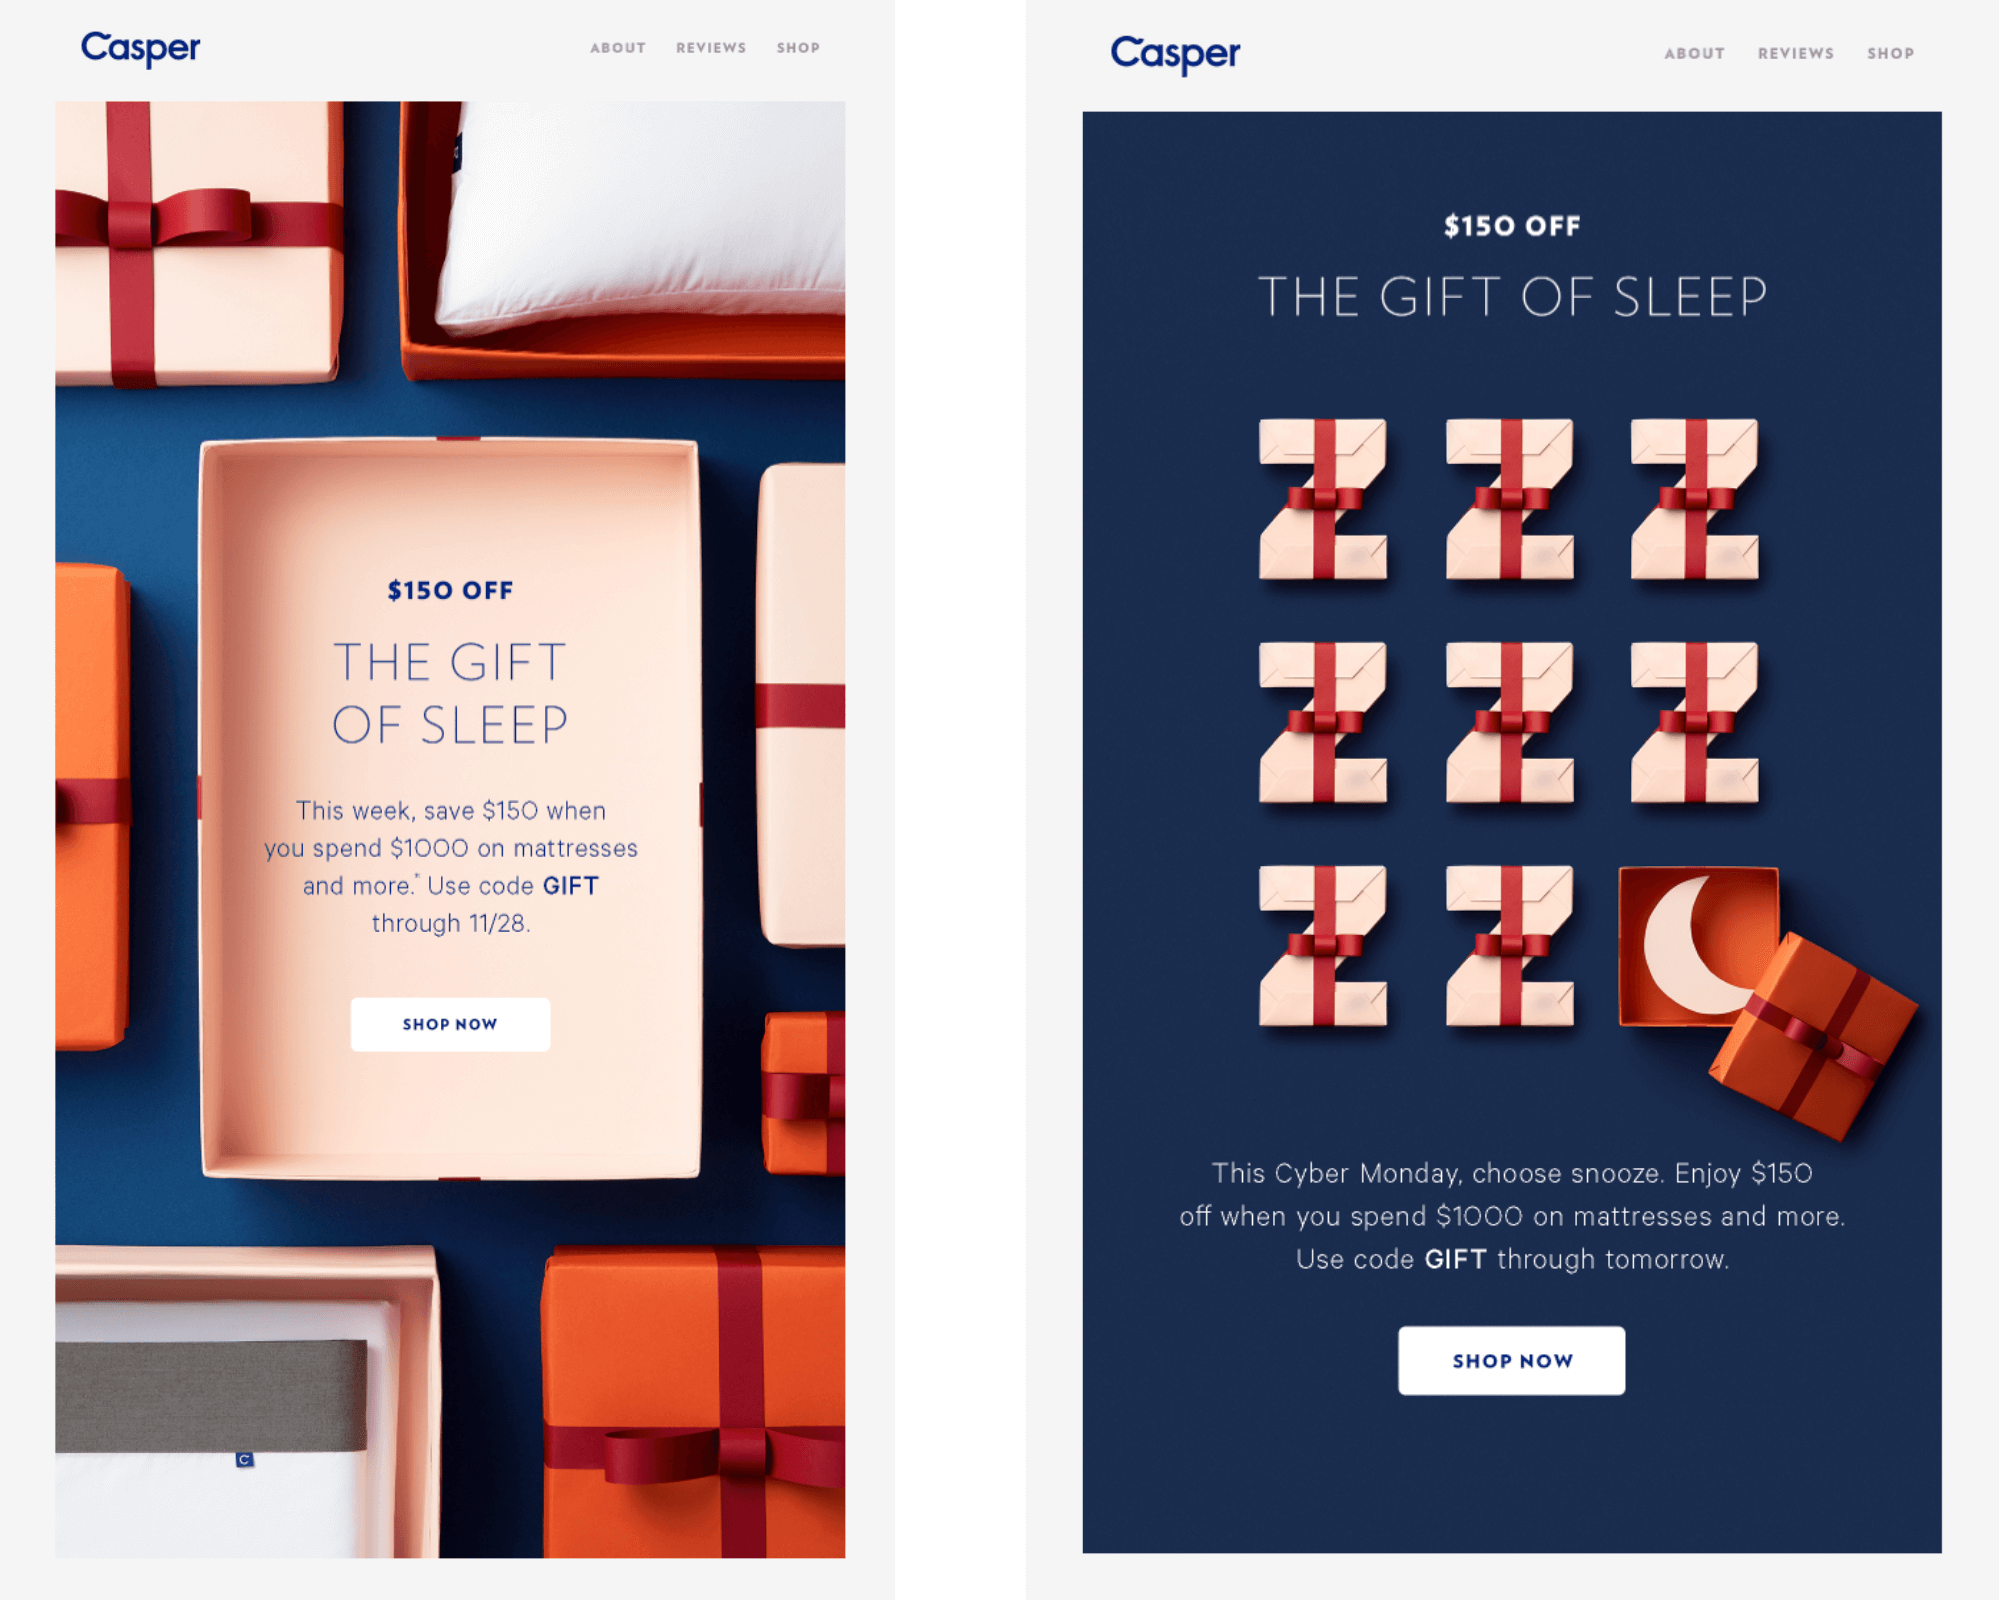 Both Casper emails showcase gift boxes with bows and have a similar color scheme: light peach, red, orange, and deep blue.